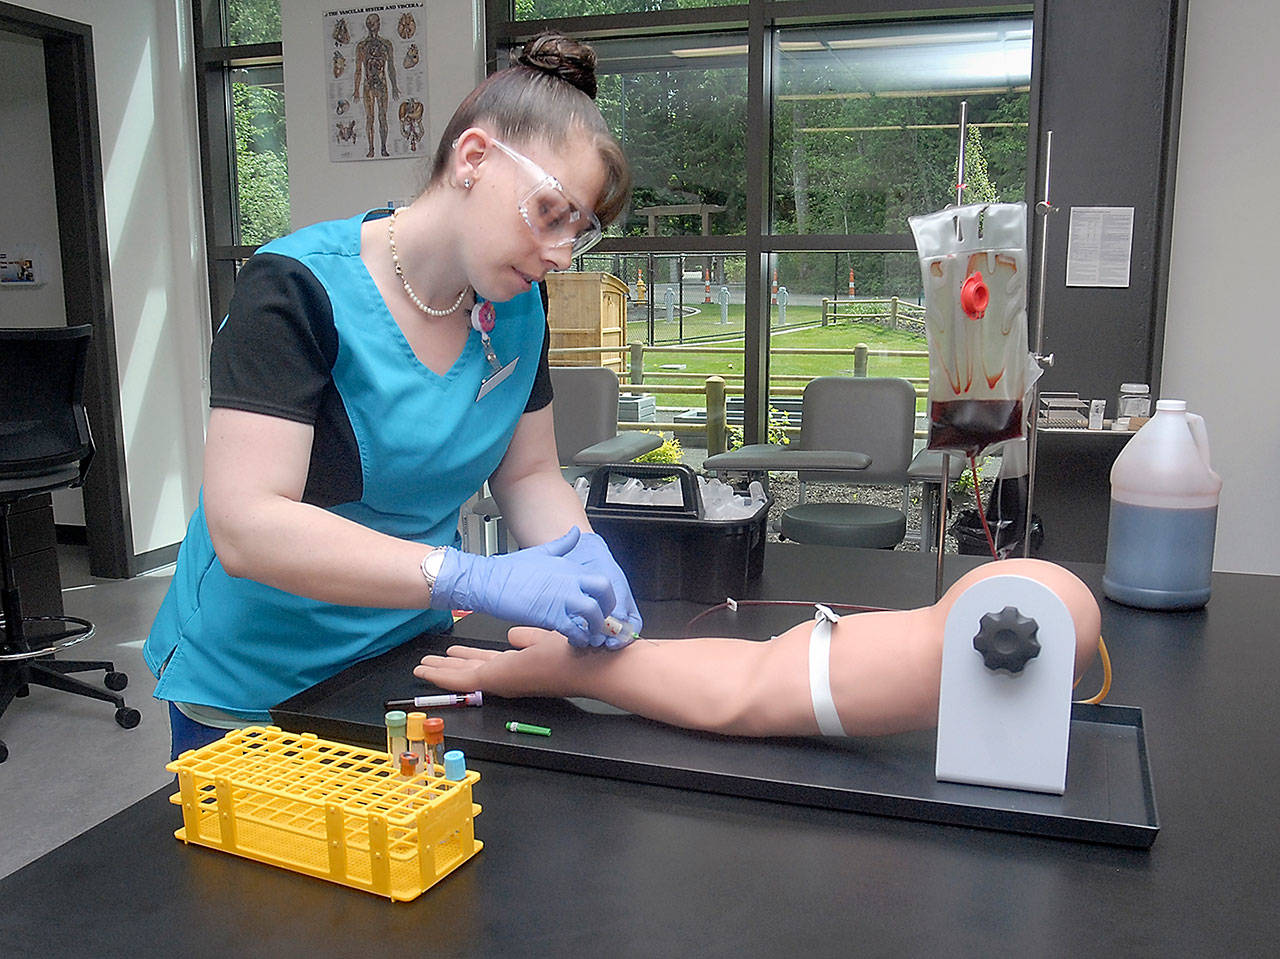 Student medical assistant Christina Wommack of Port Angeles practices her phlebotomy skills on an artificial arm Thursday in a clinical lab seminar classroom in the newly constructed Allied Health & Early Childhood Education Building on the Port Angeles campus of Peninsula College. (Keith Thorpe/Peninsula Daily News)